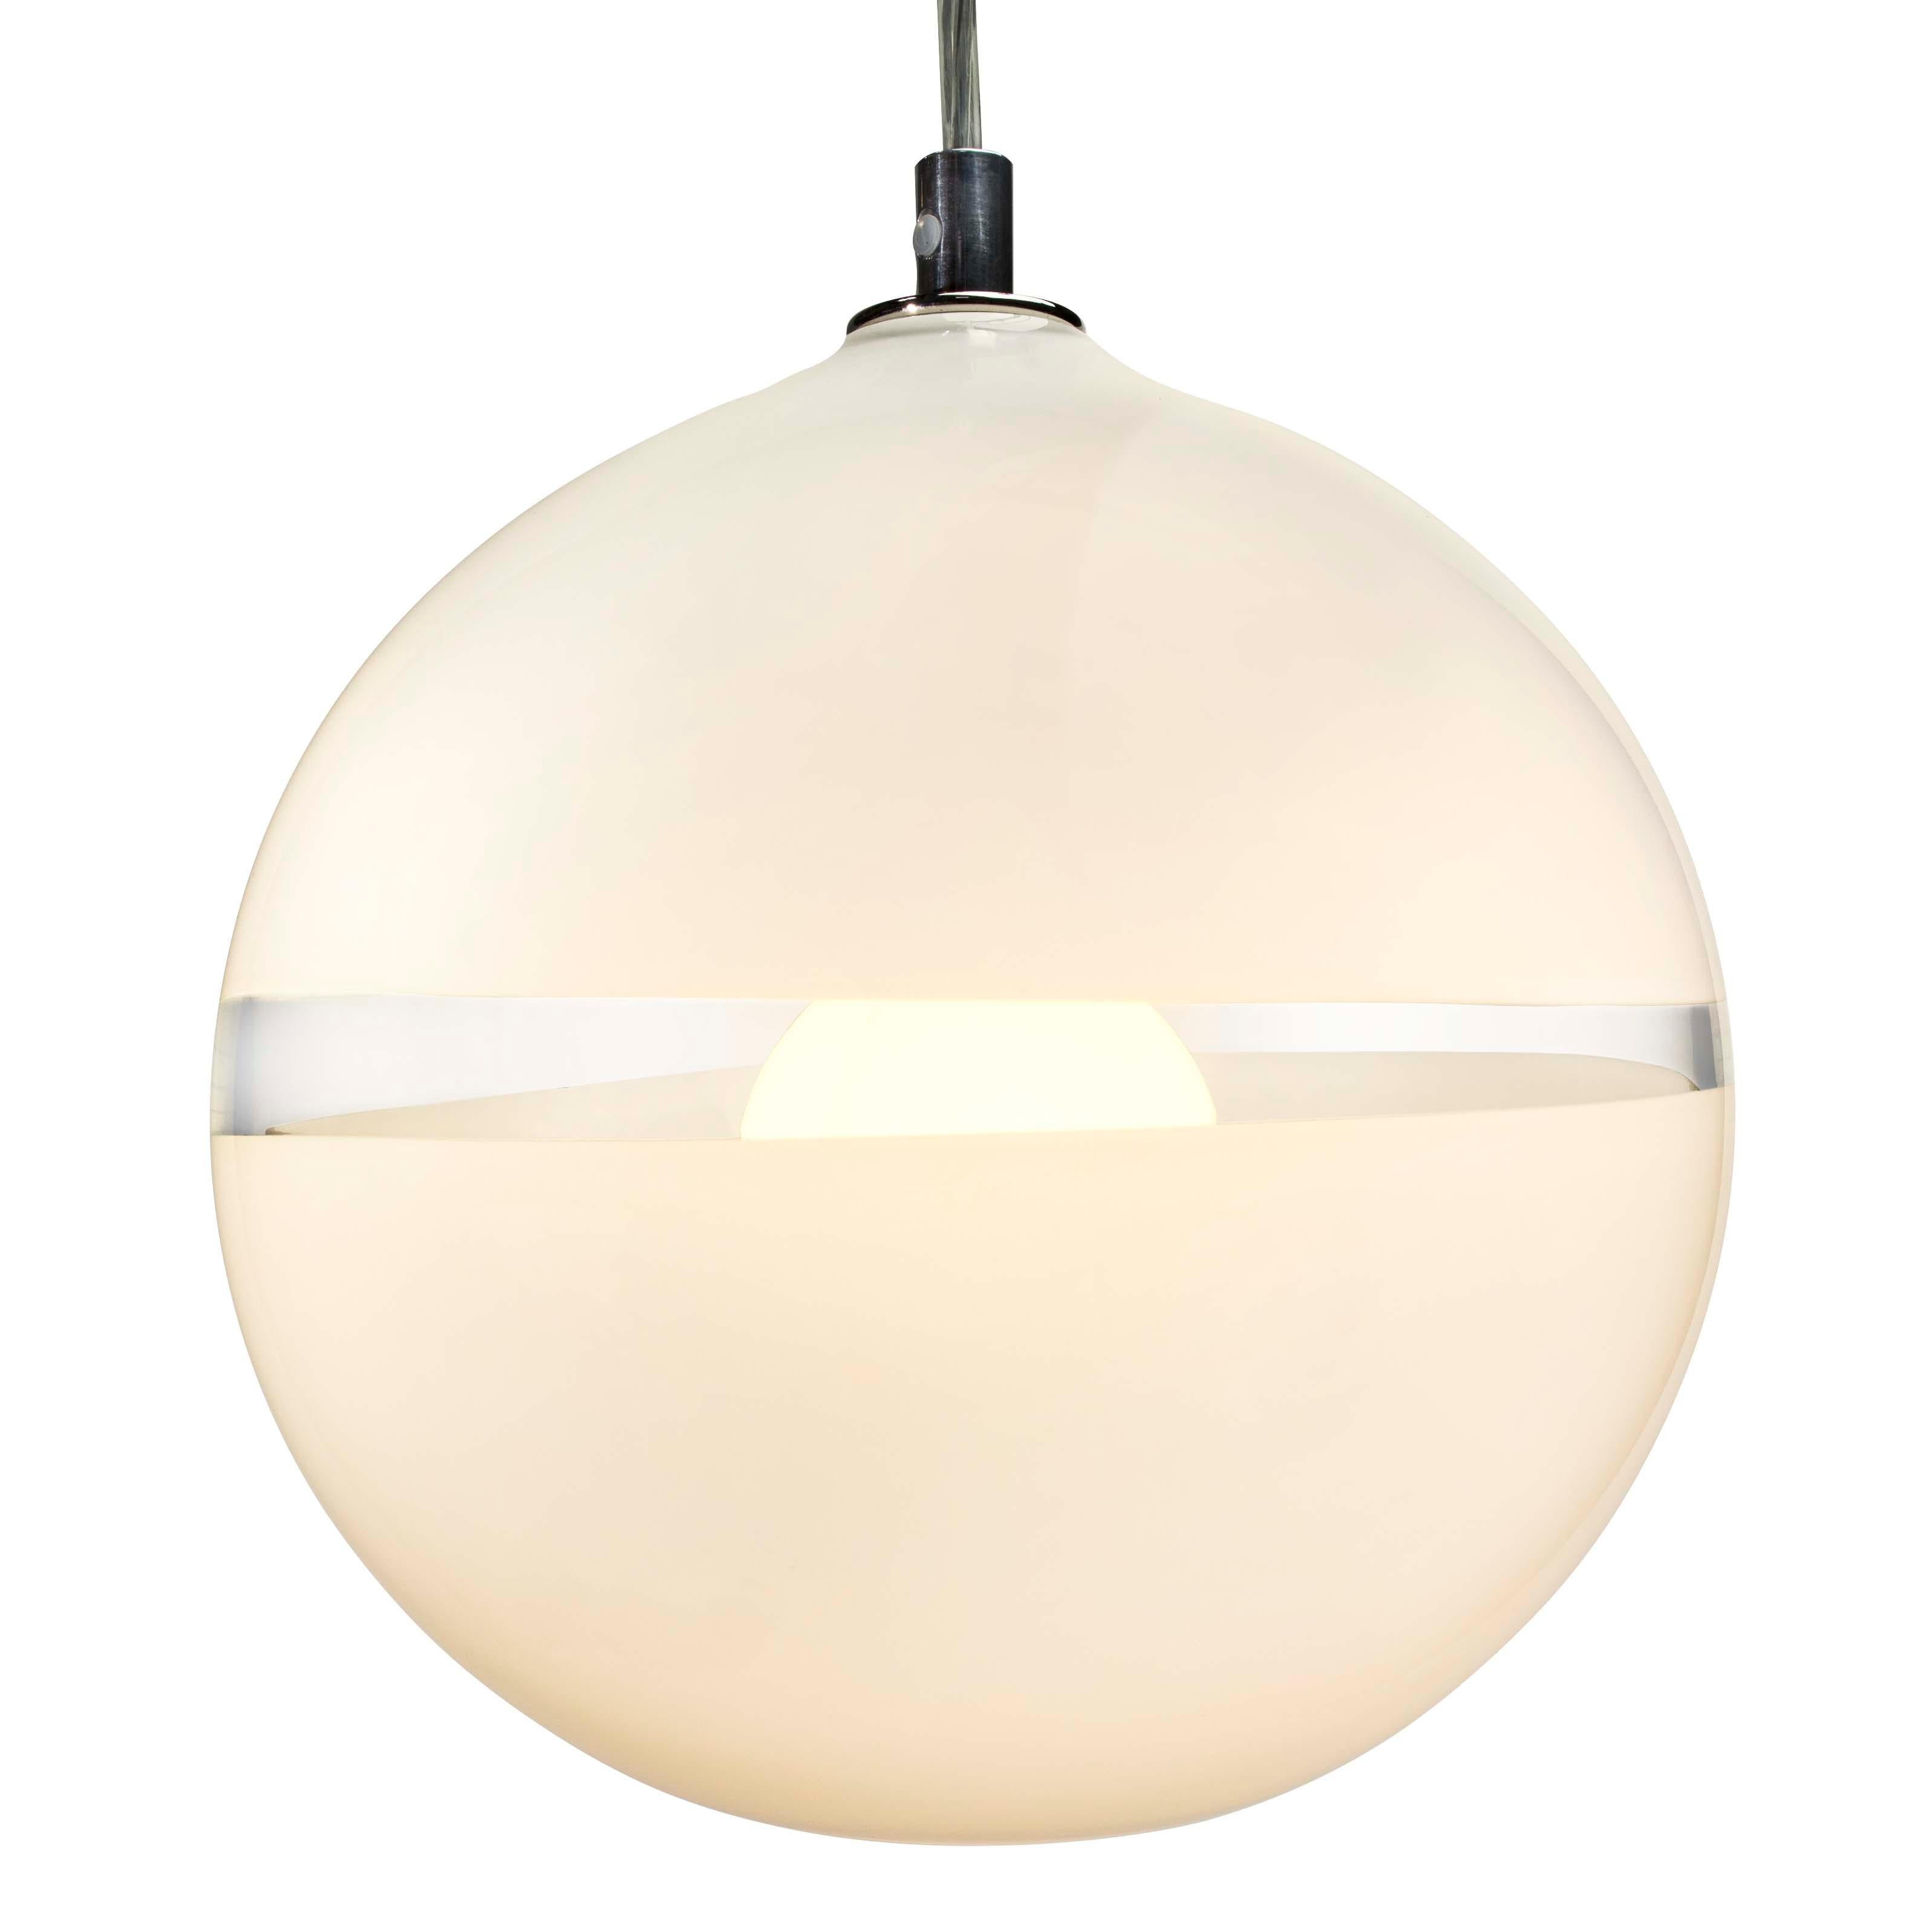 Lattimo Large Orb Pendant Light, Hand Blown Glass - Made to Order For Sale